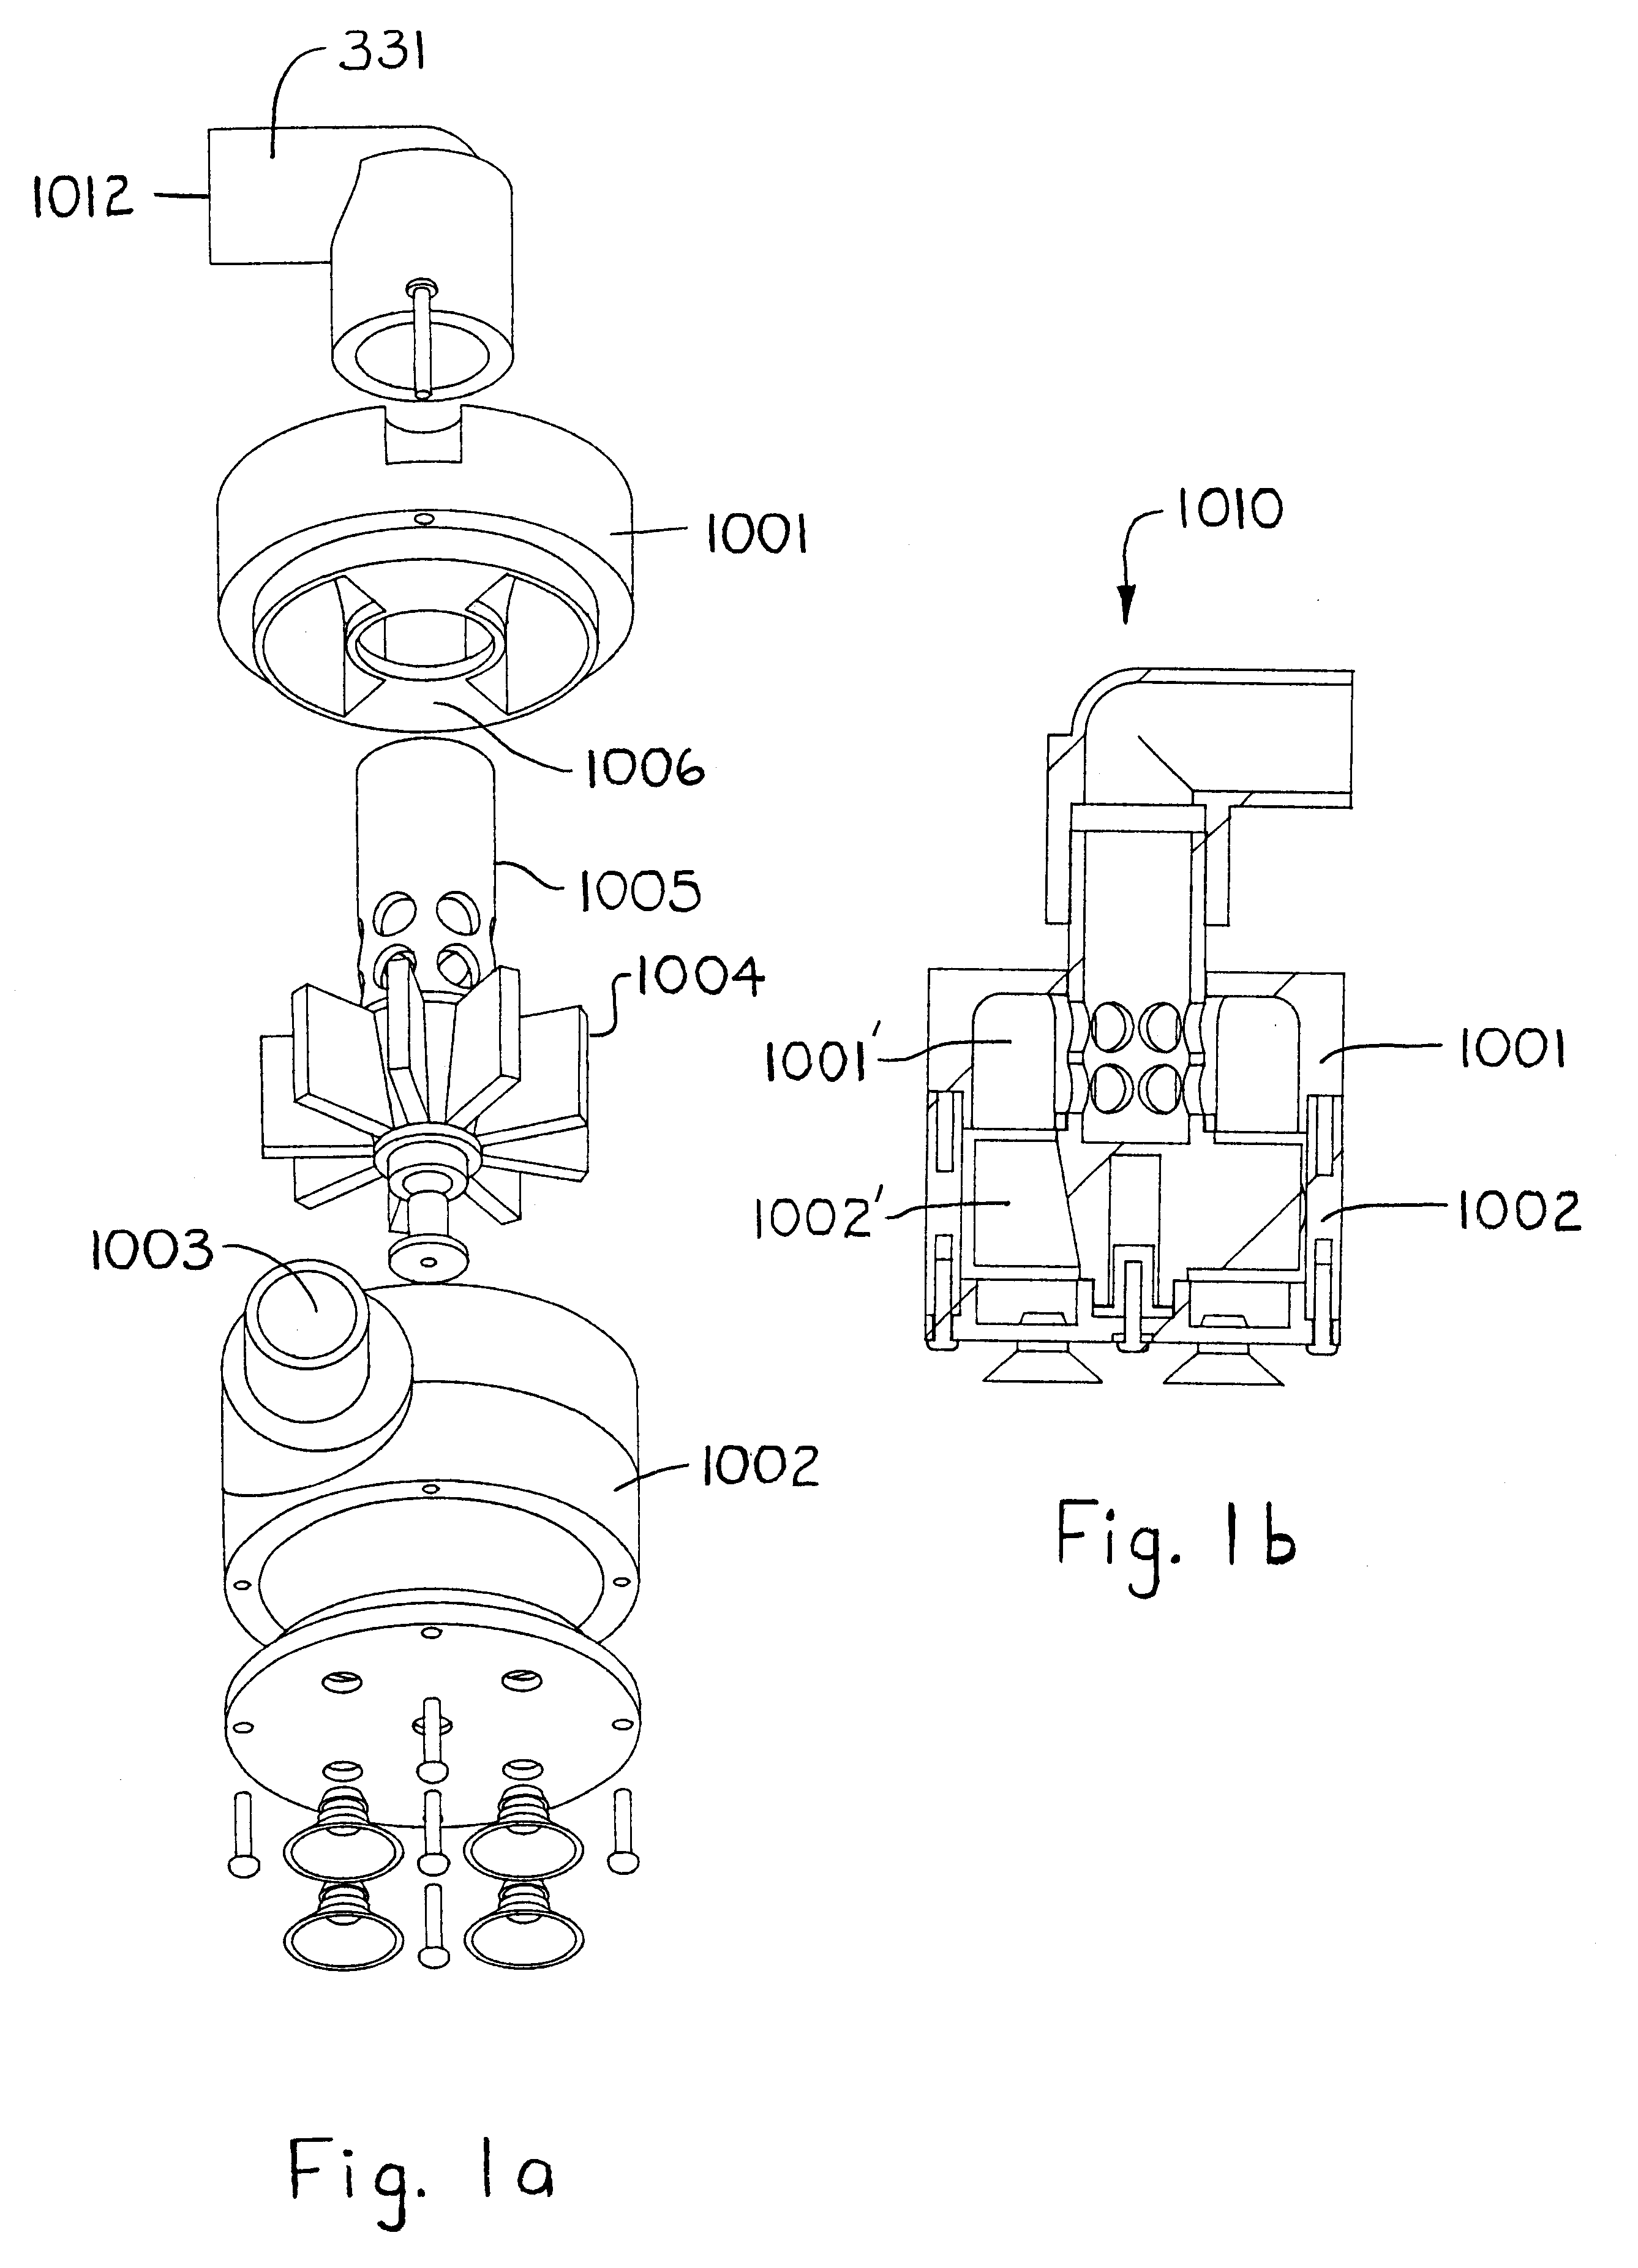 Agitators for wave-making or mixing as for tanks, and pumps and filters